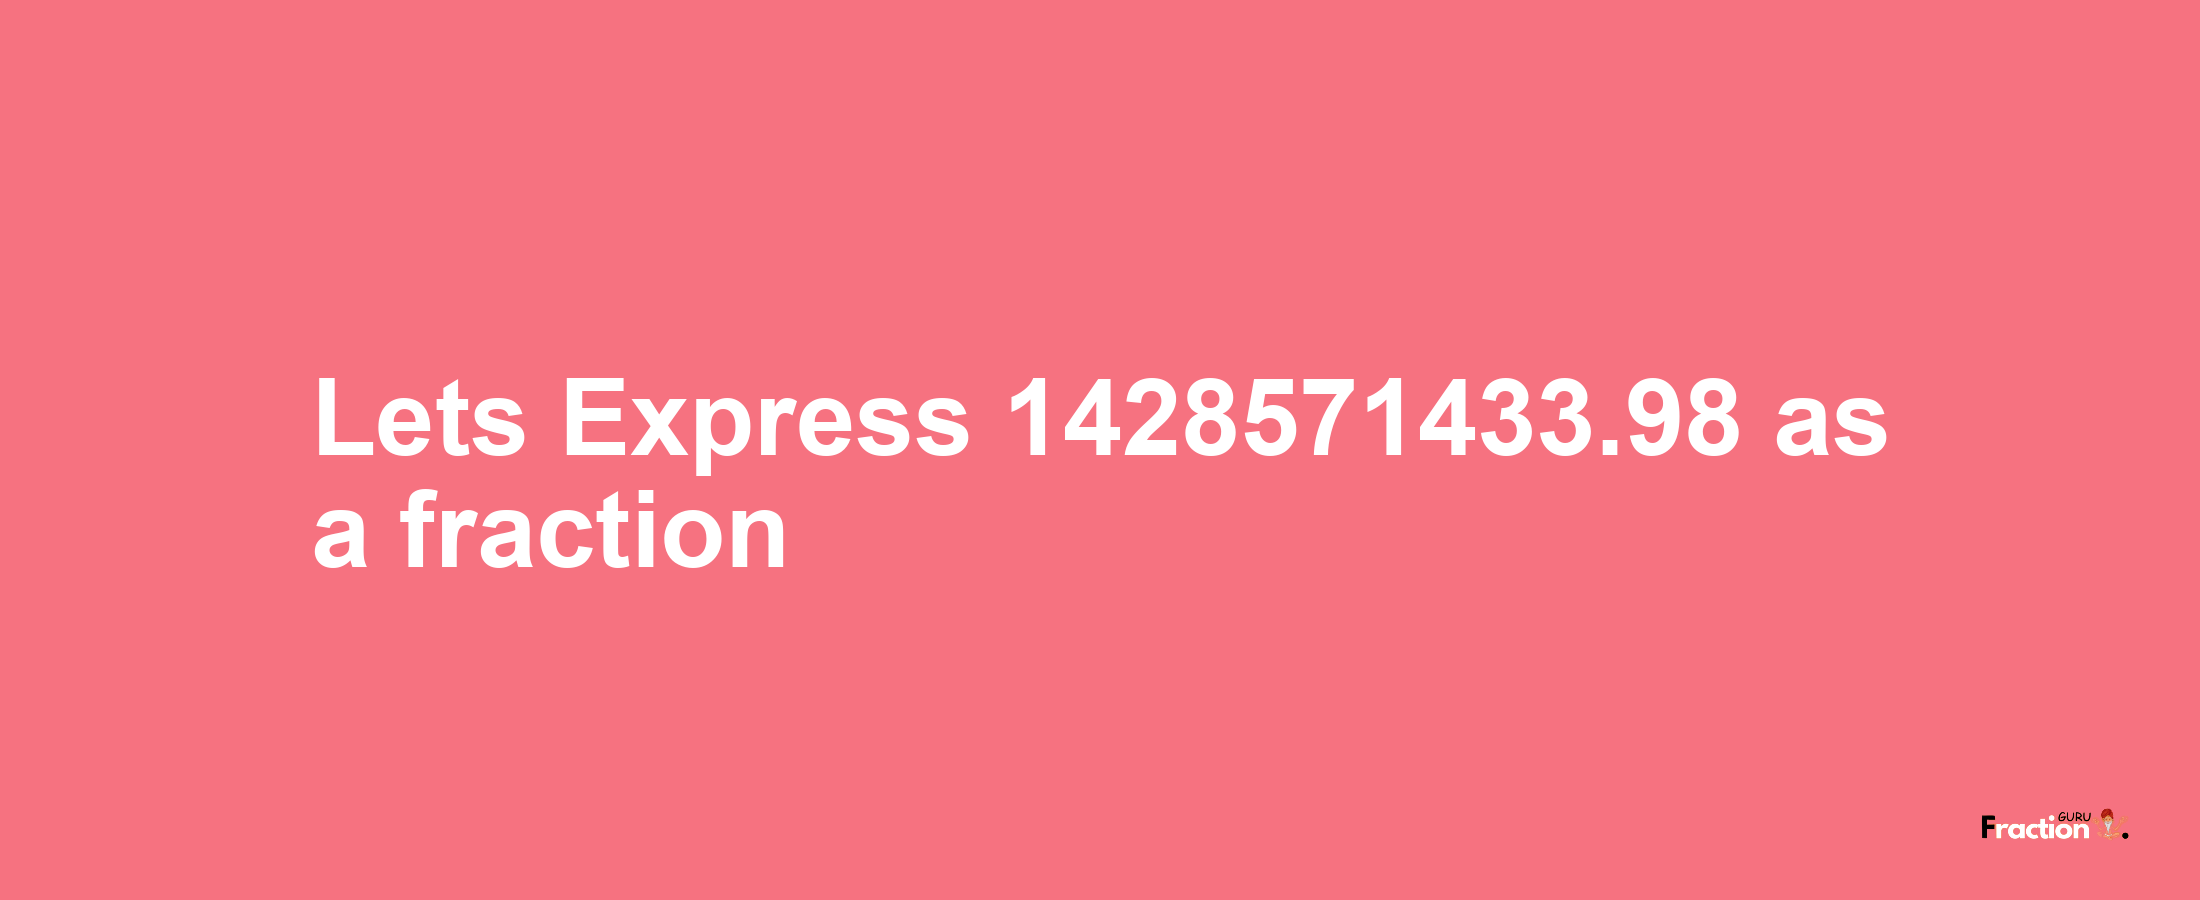 Lets Express 1428571433.98 as afraction